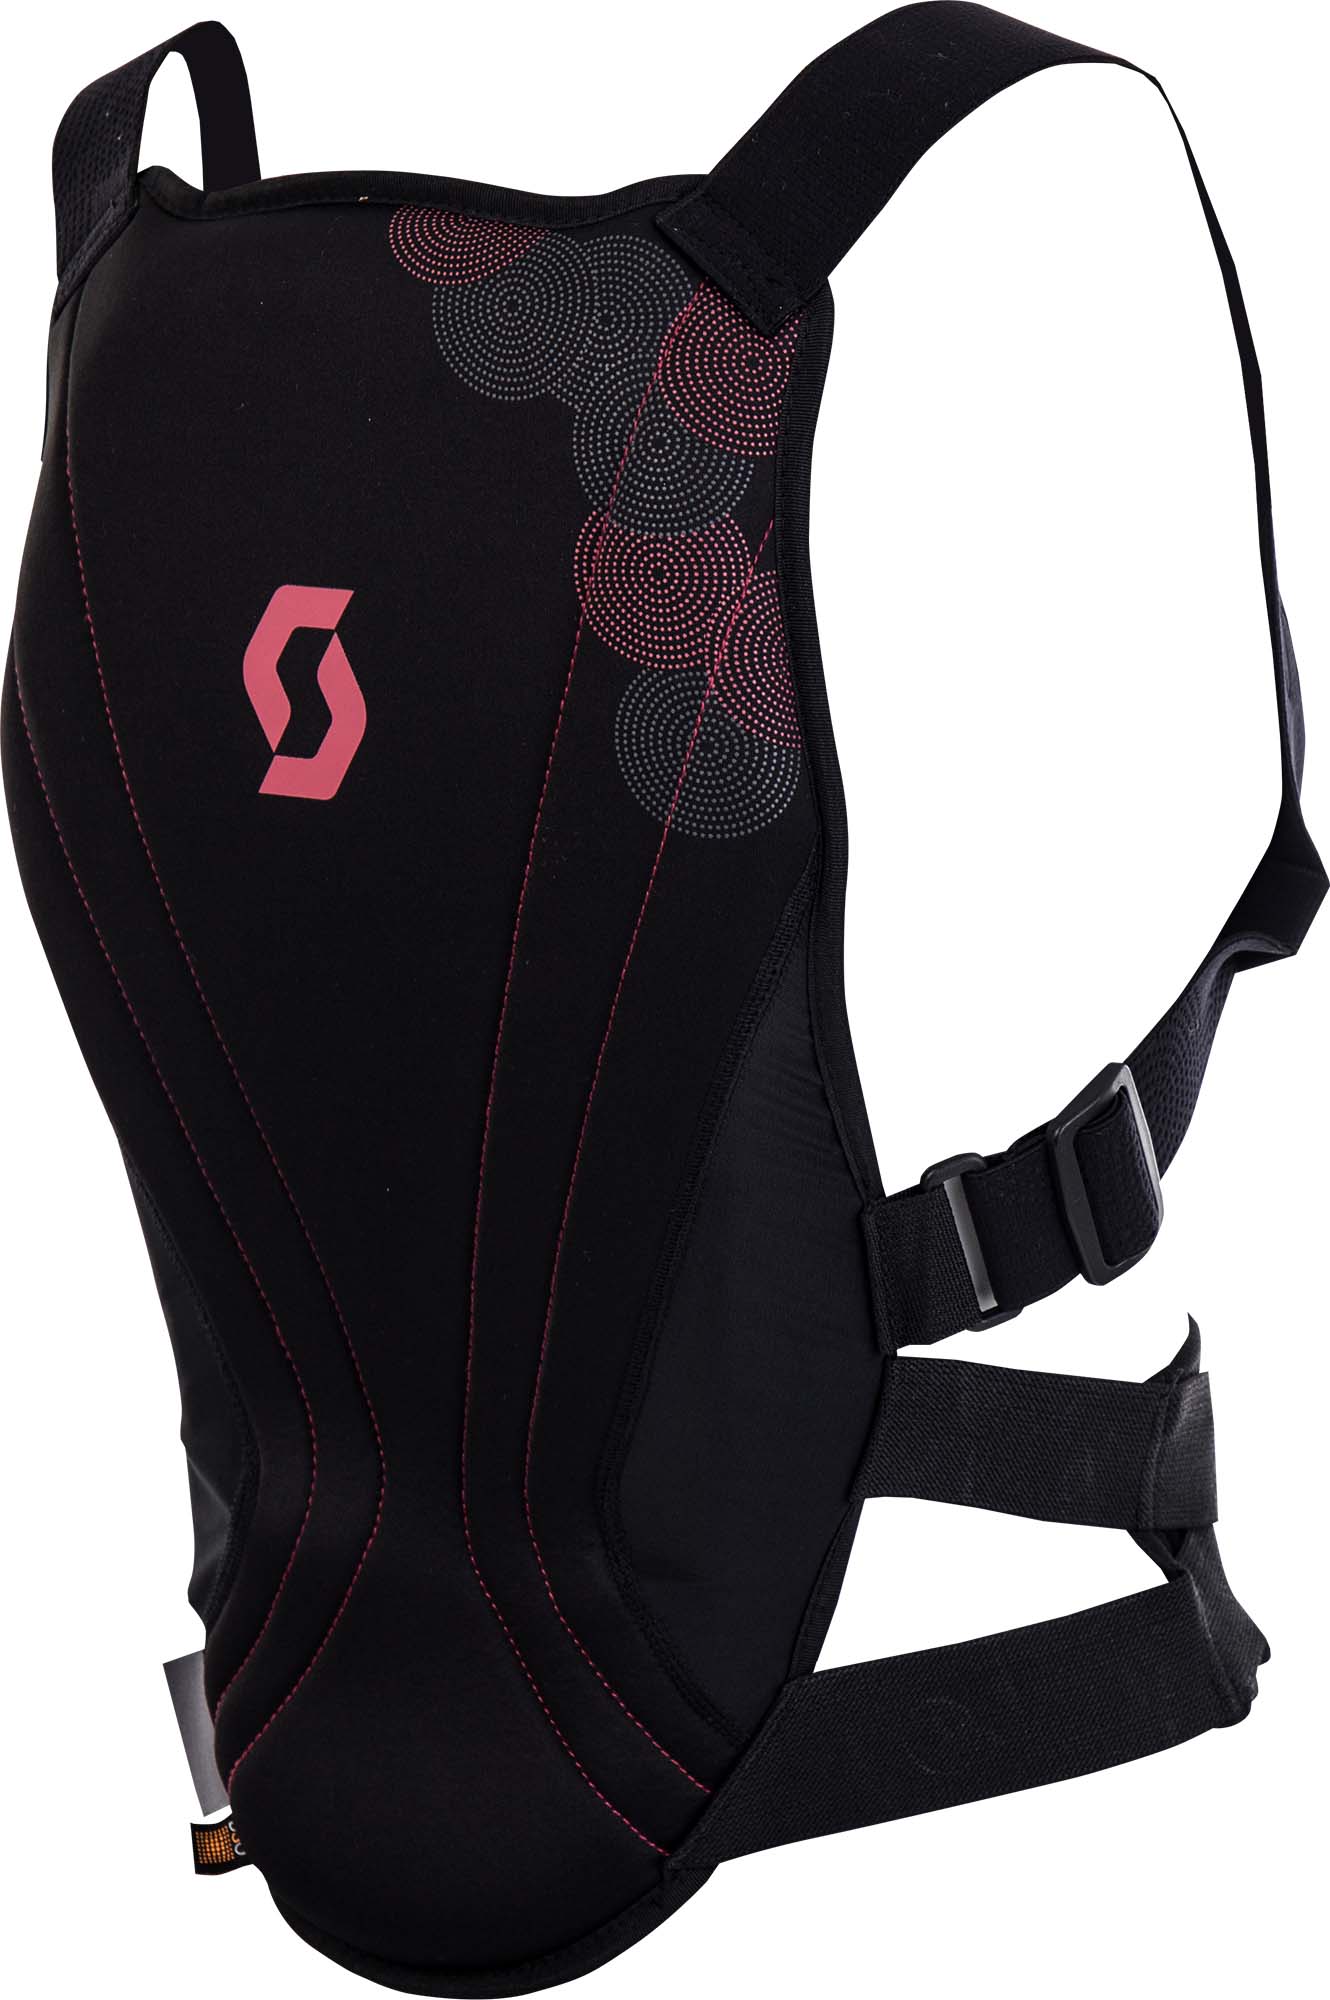 Women's Spine Protector